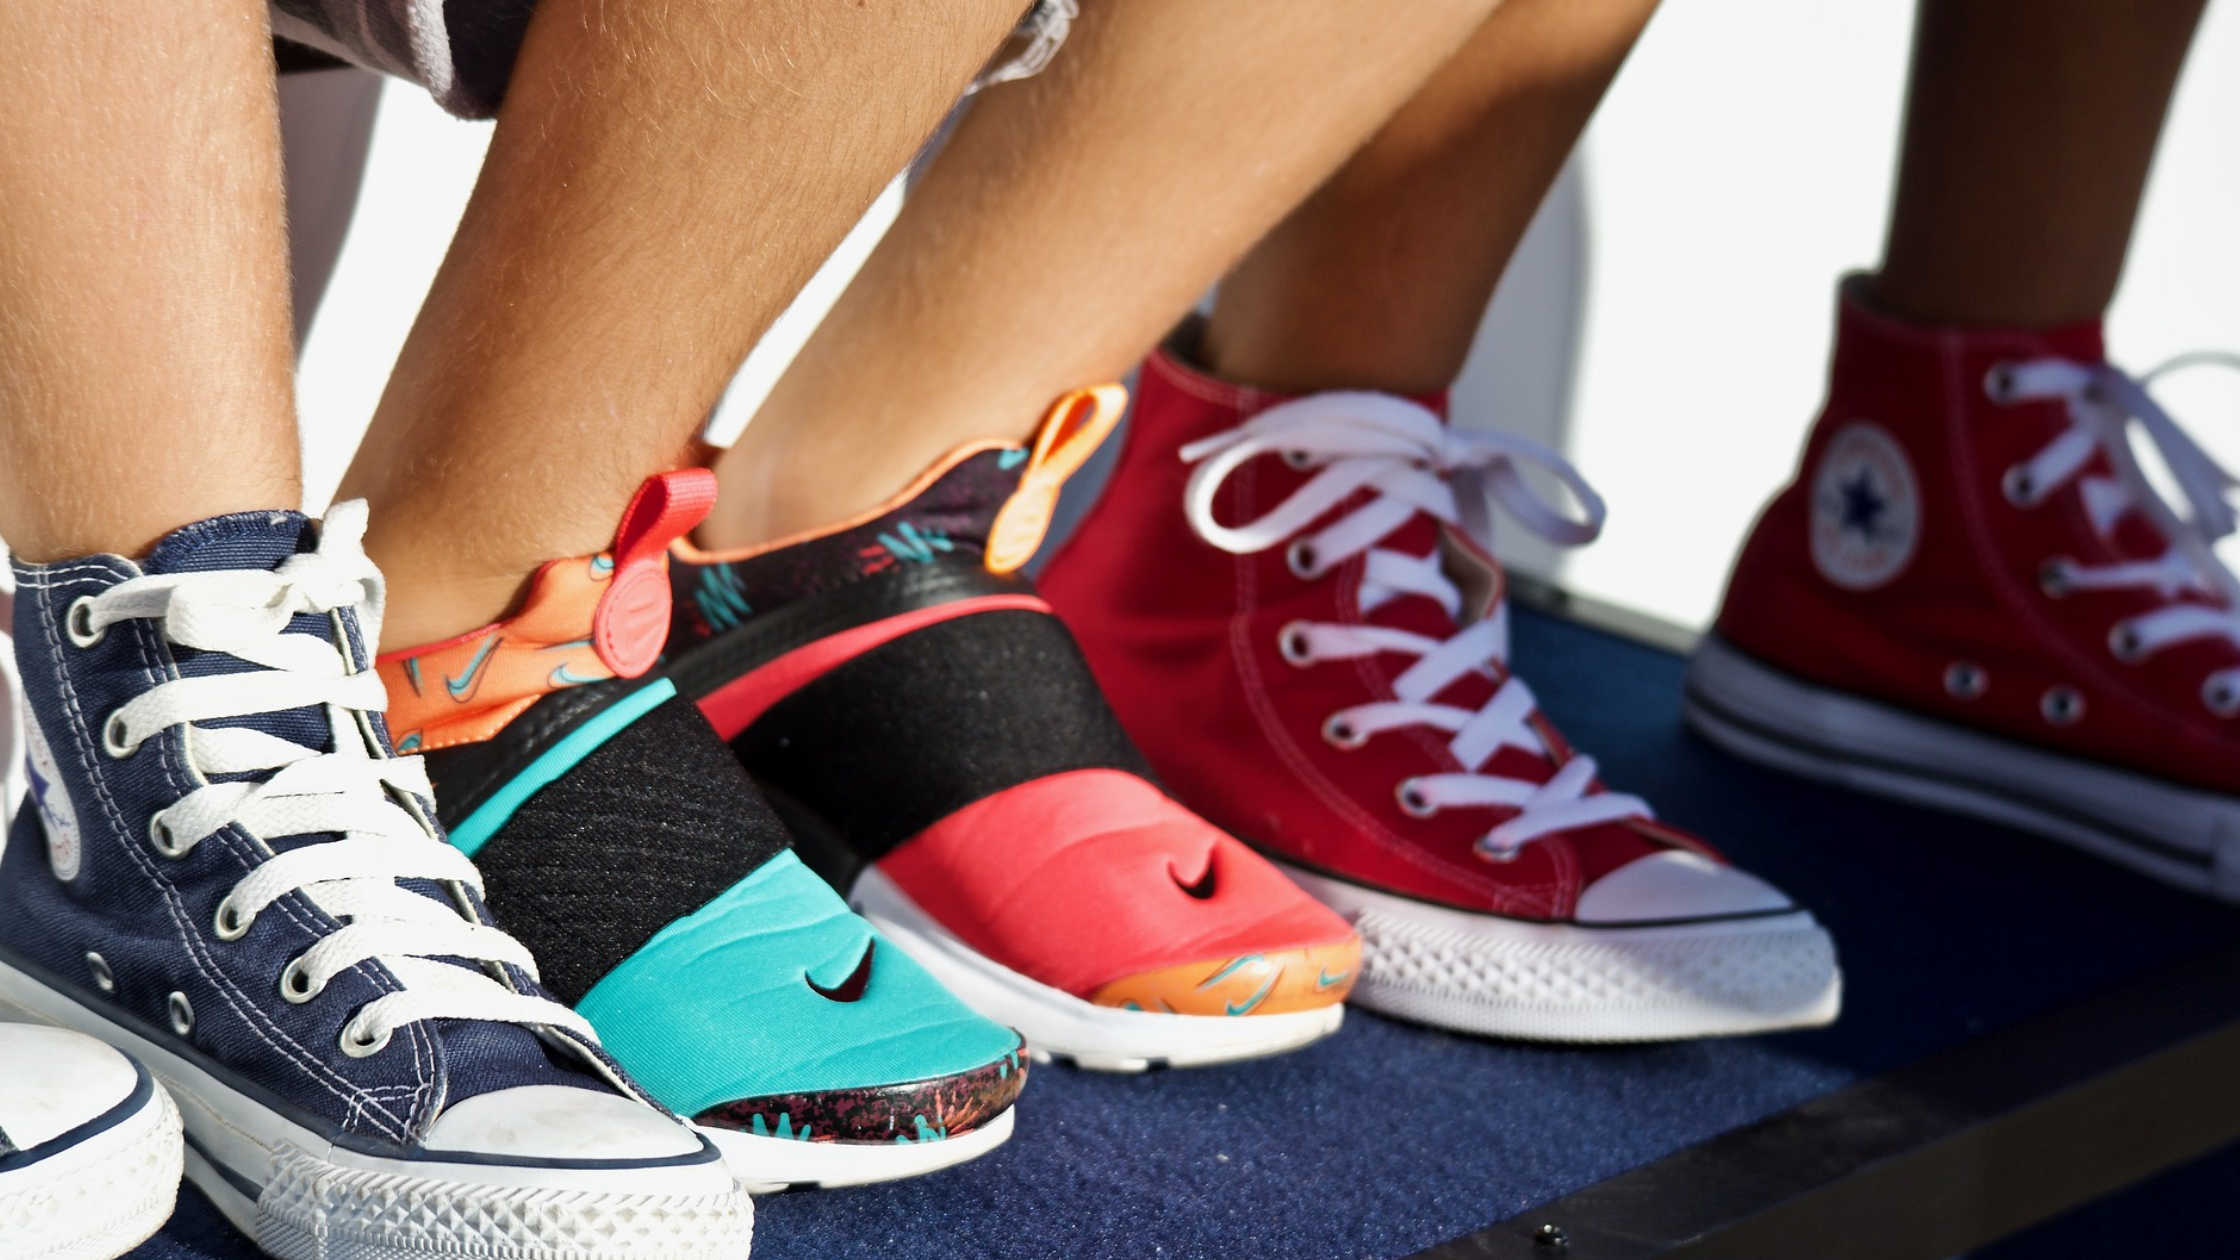 The basics of caring for your sneakers